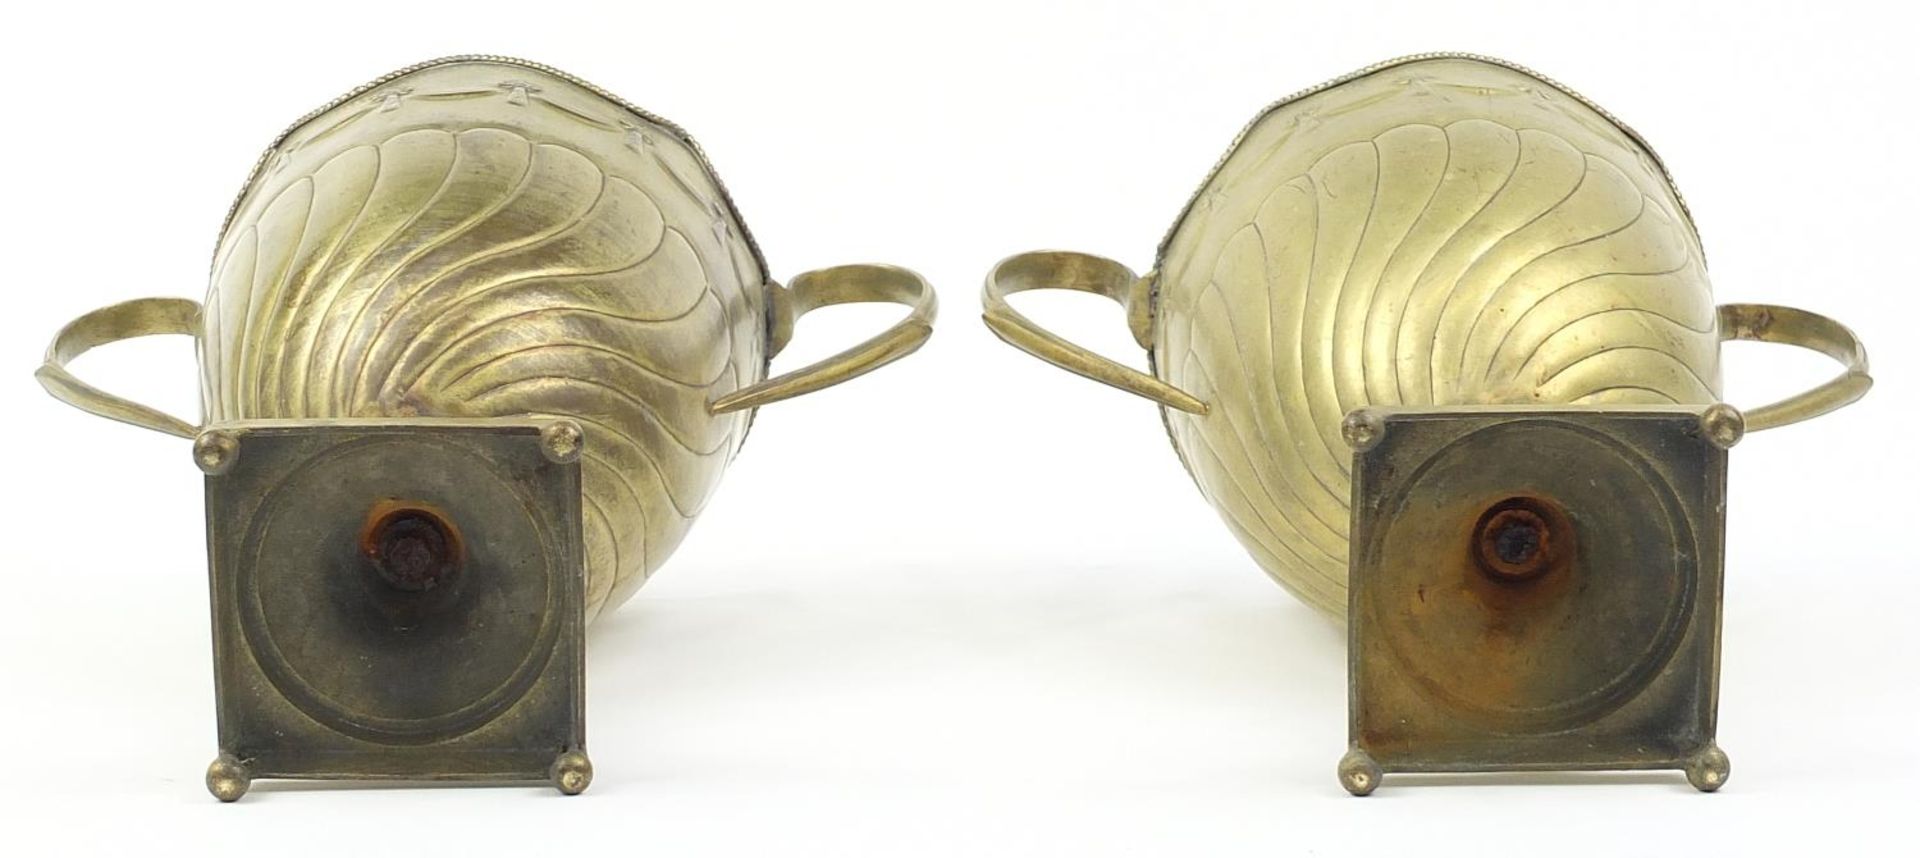 Pair of Antique bronzed urn design wine coolers with twin handles embossed with swags, 42cm high - Image 3 of 3